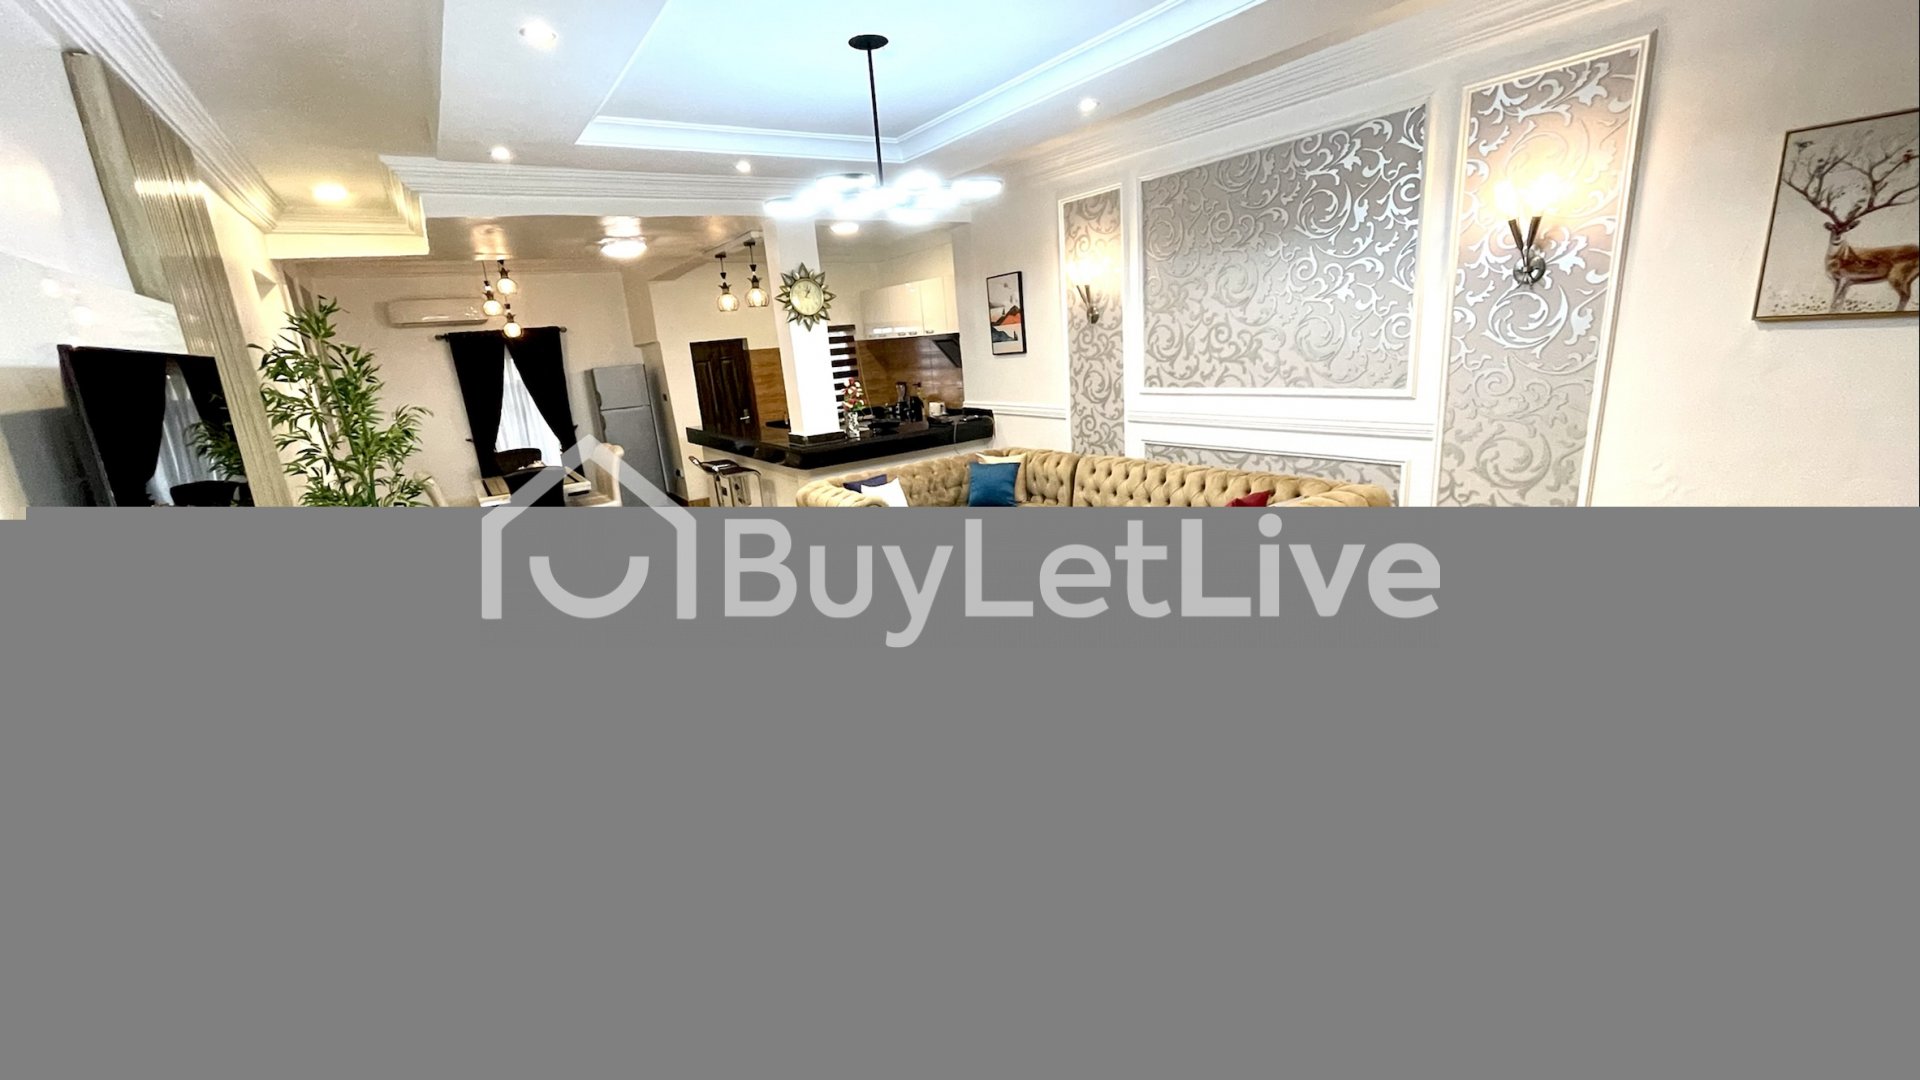 2 bedrooms Flat / Apartment for shortlet at Osapa london